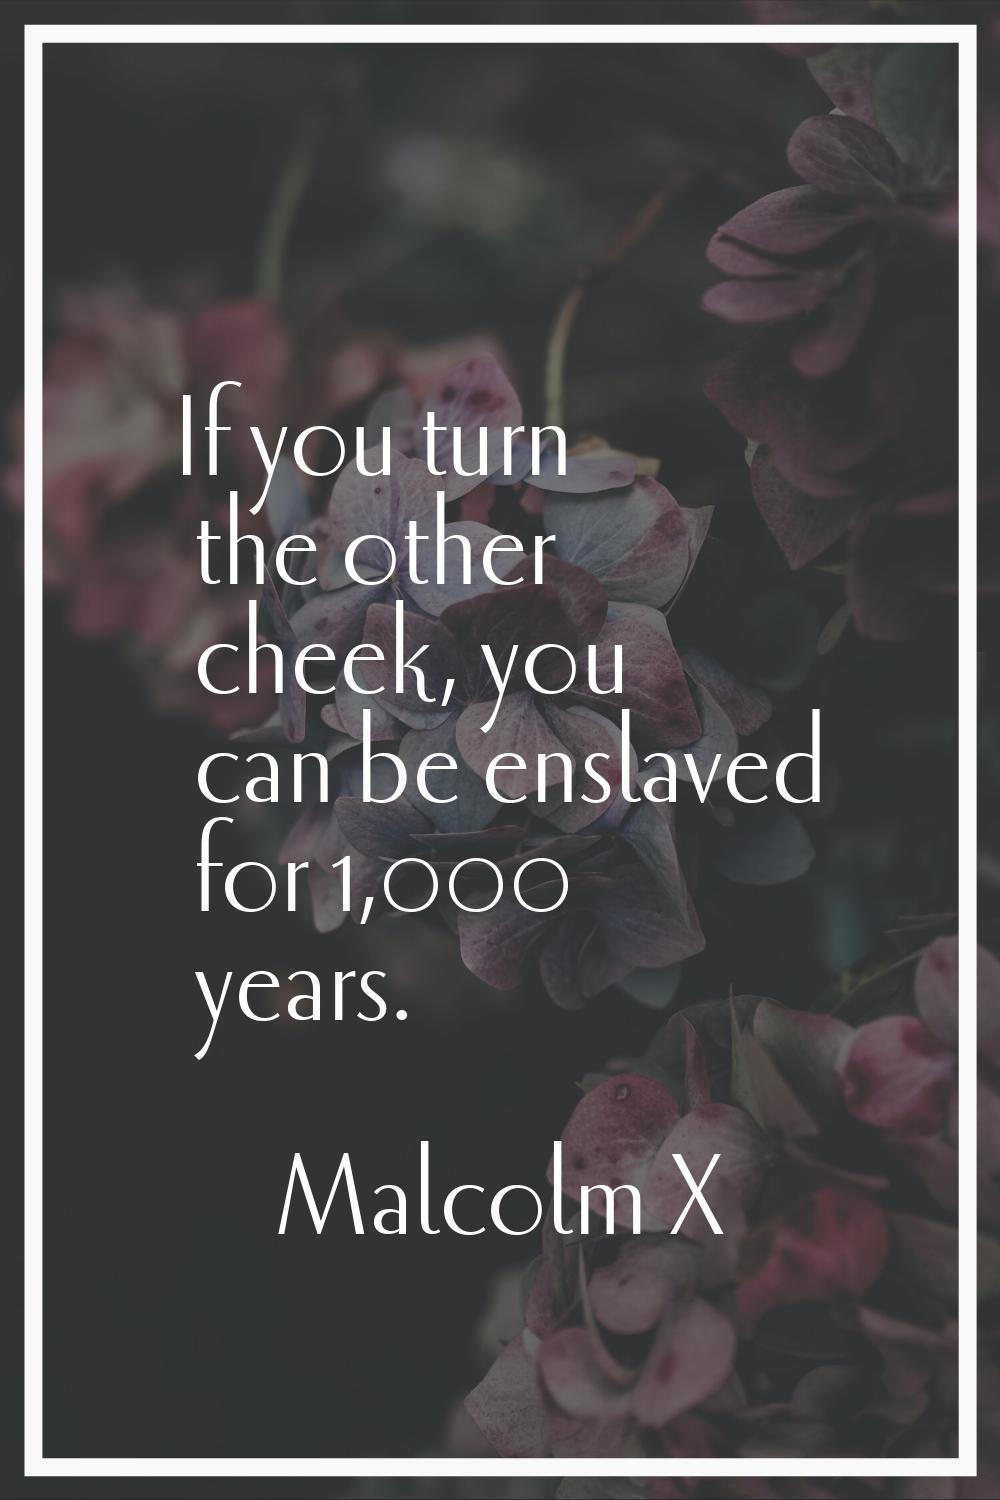 If you turn the other cheek, you can be enslaved for 1,000 years.